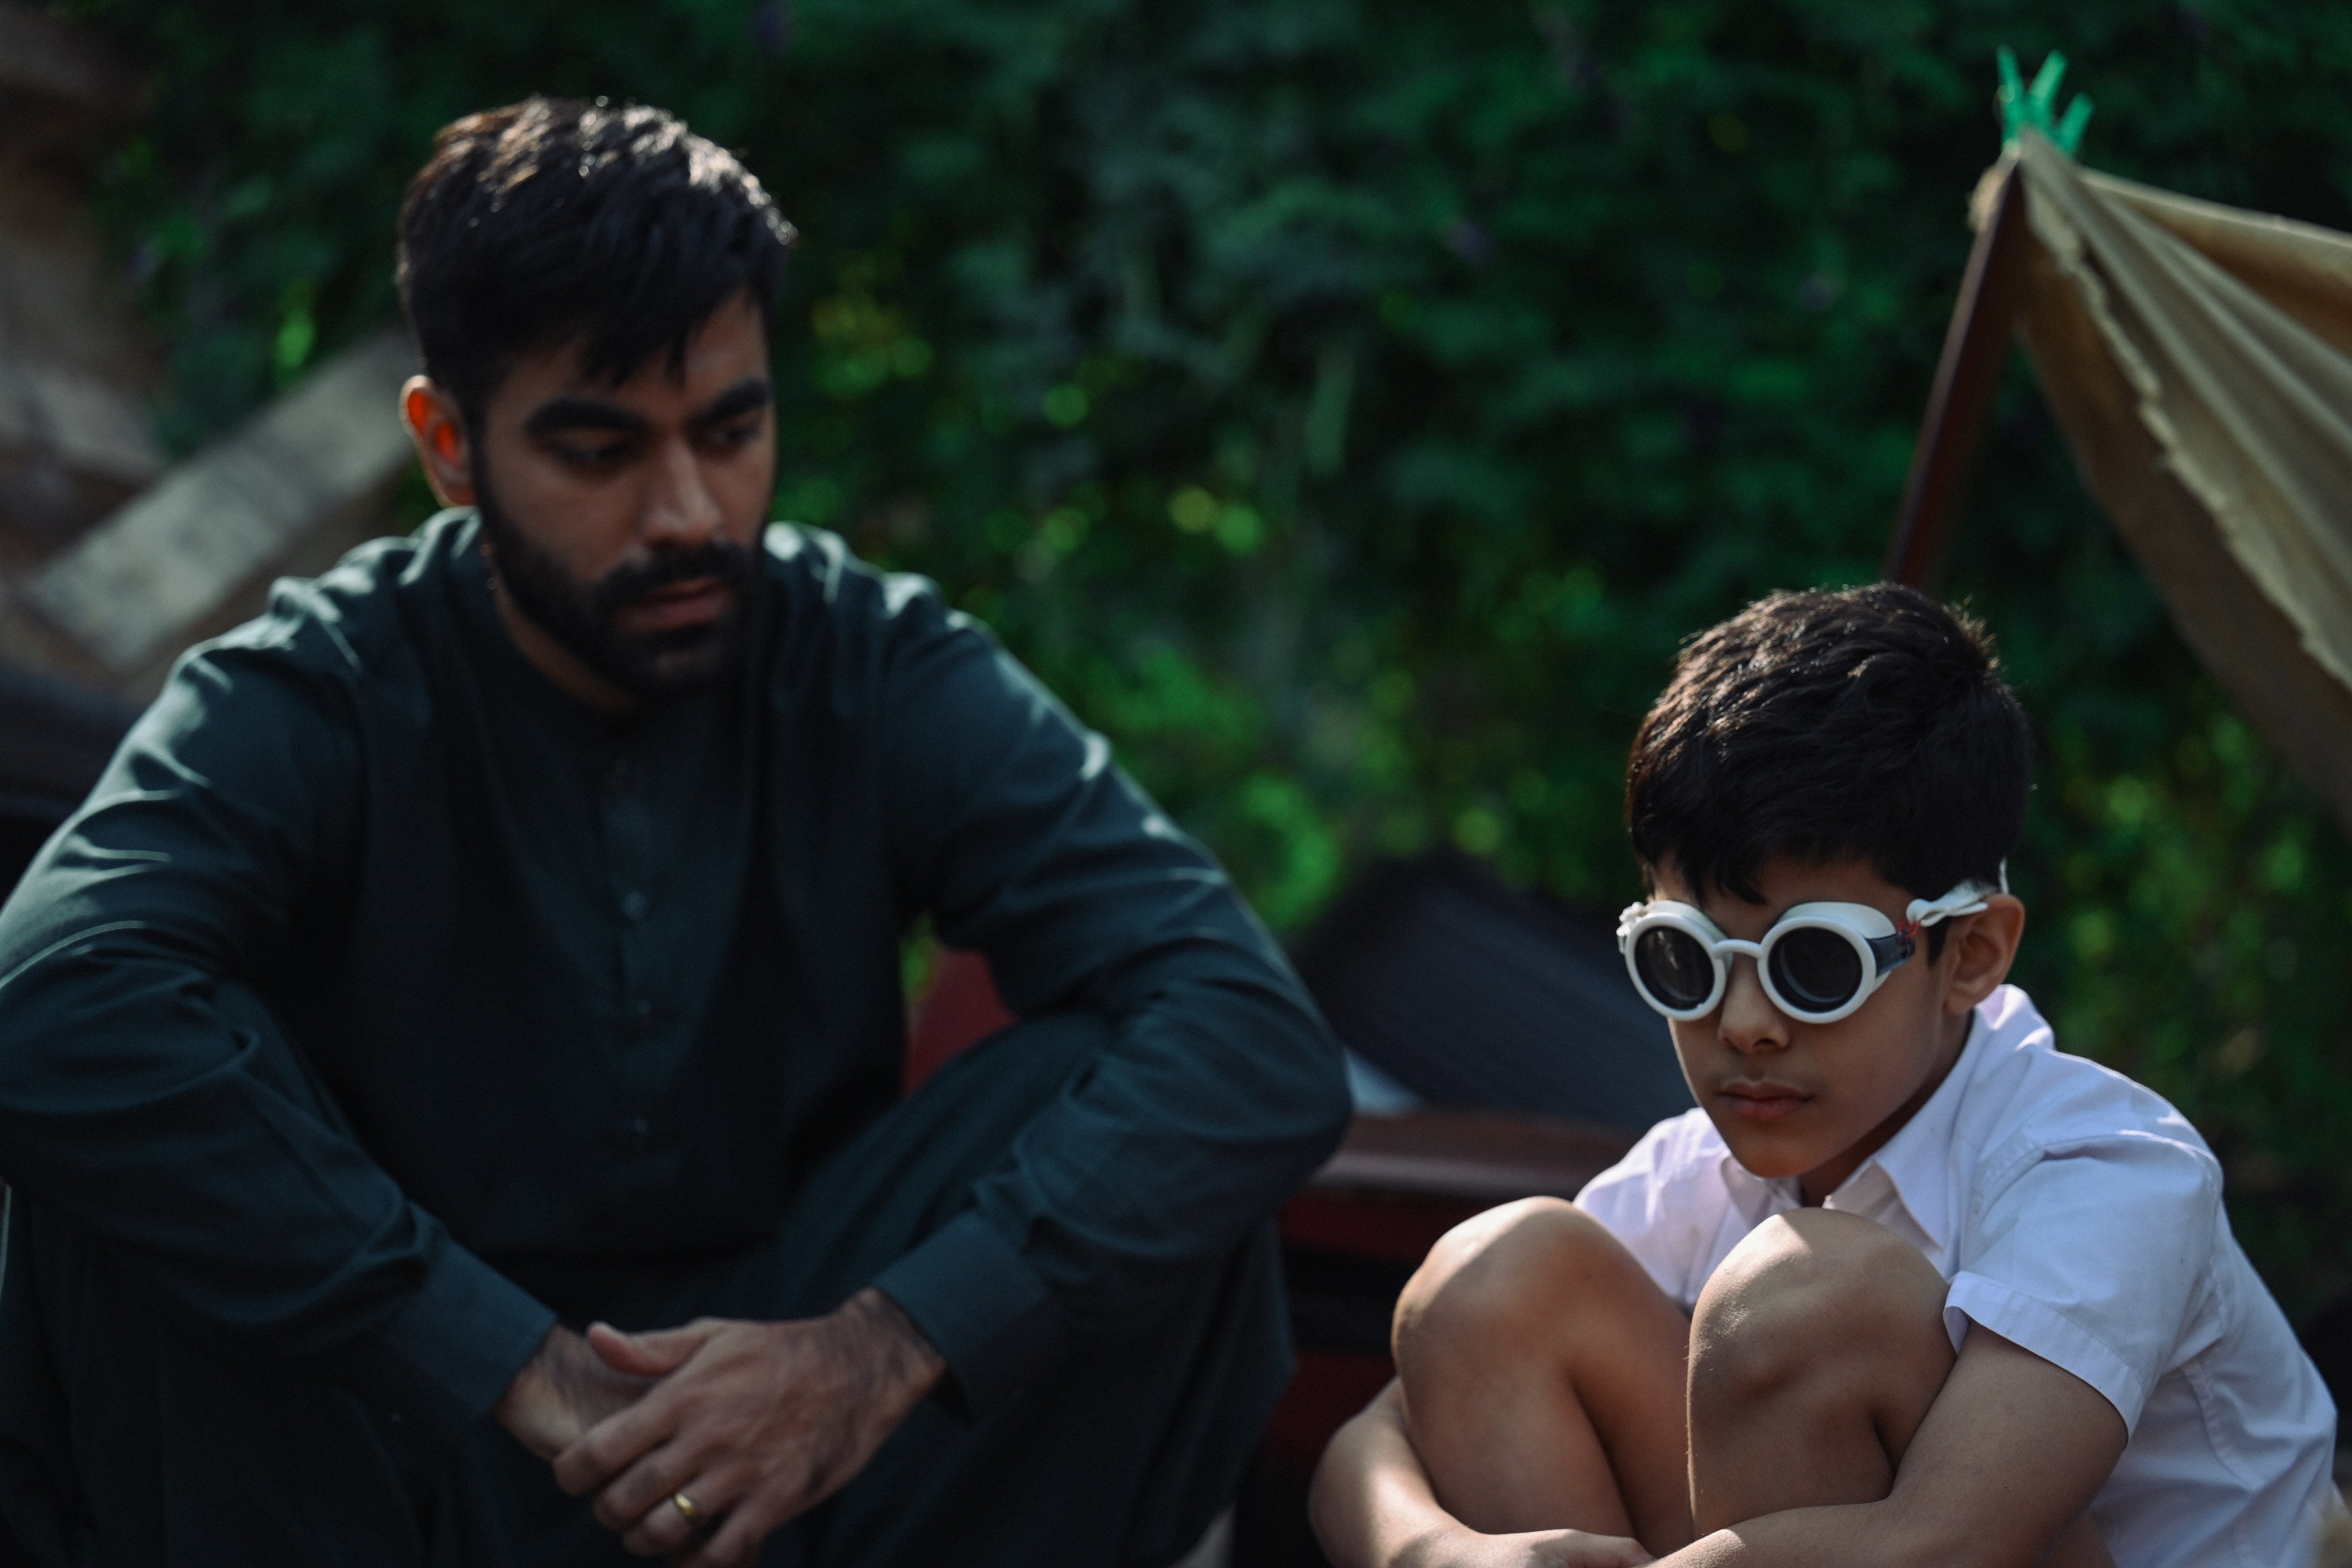 Inderjeet Singh (left) and Sahal Zaman in a still from The Sunny Side of the Street, a film about a Hong Kong taxi driver and a young refugee boy he meets. Image: Petra Films